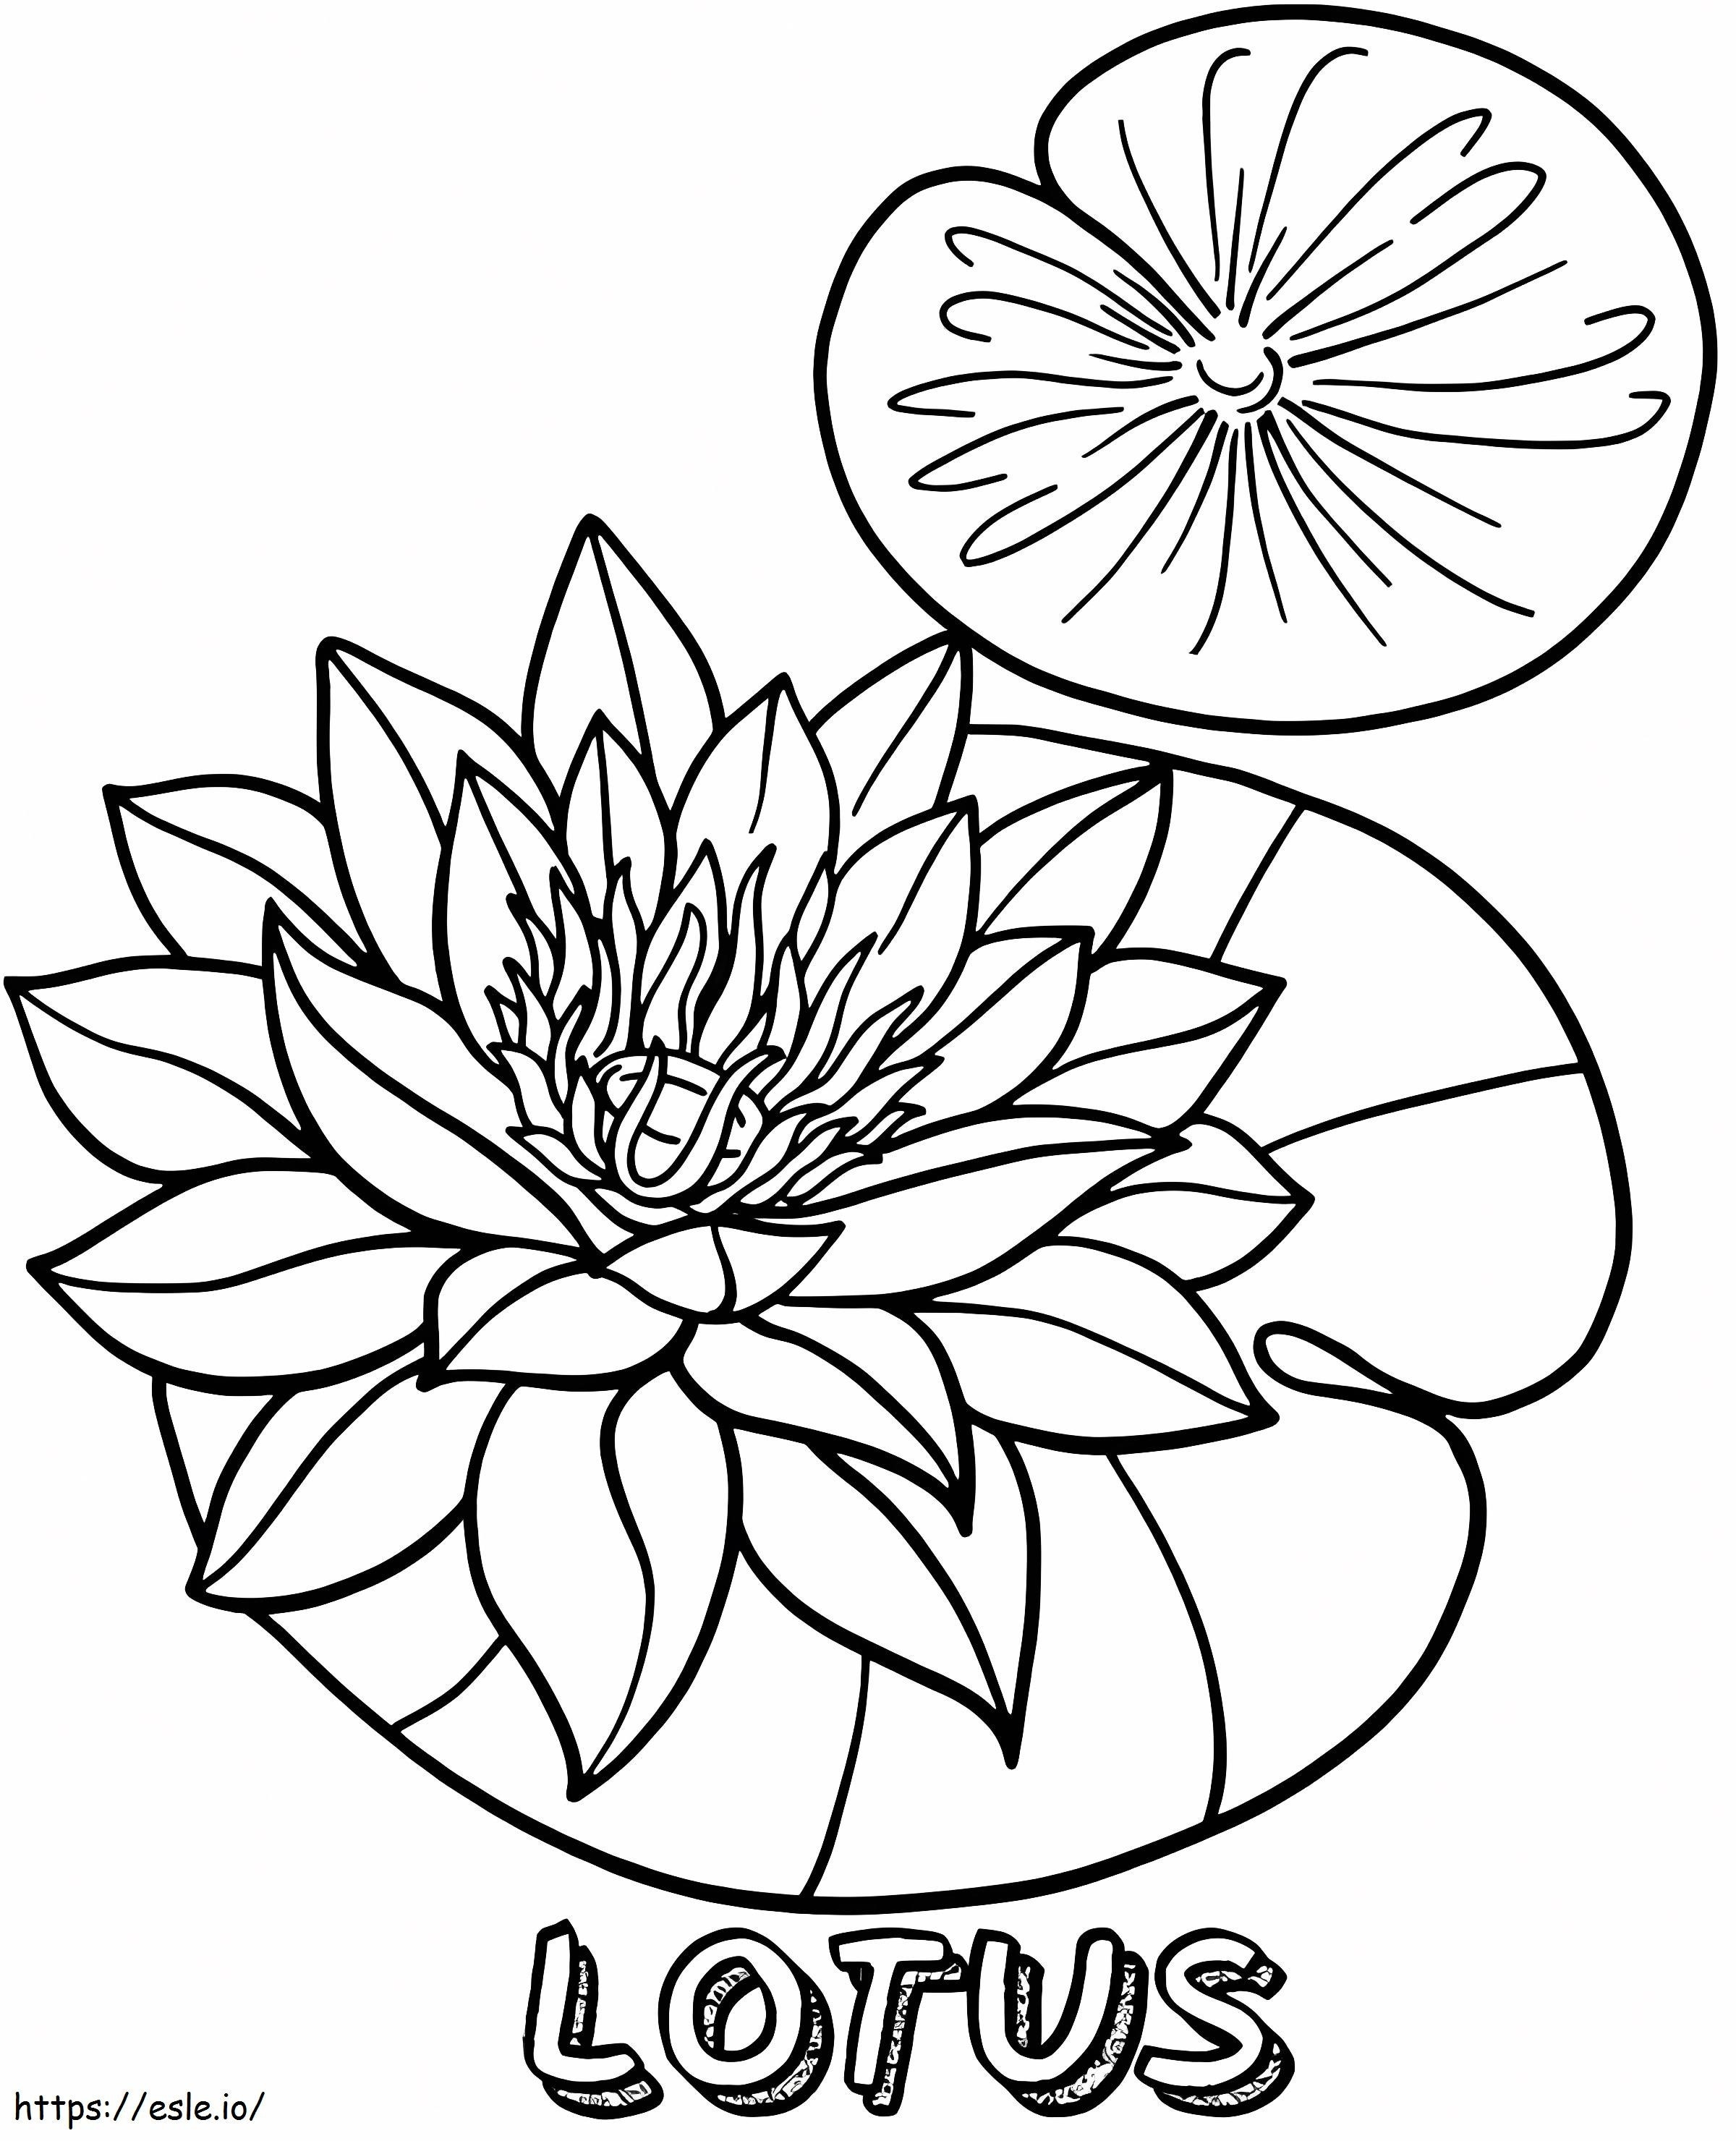 Lotus For Kids coloring page